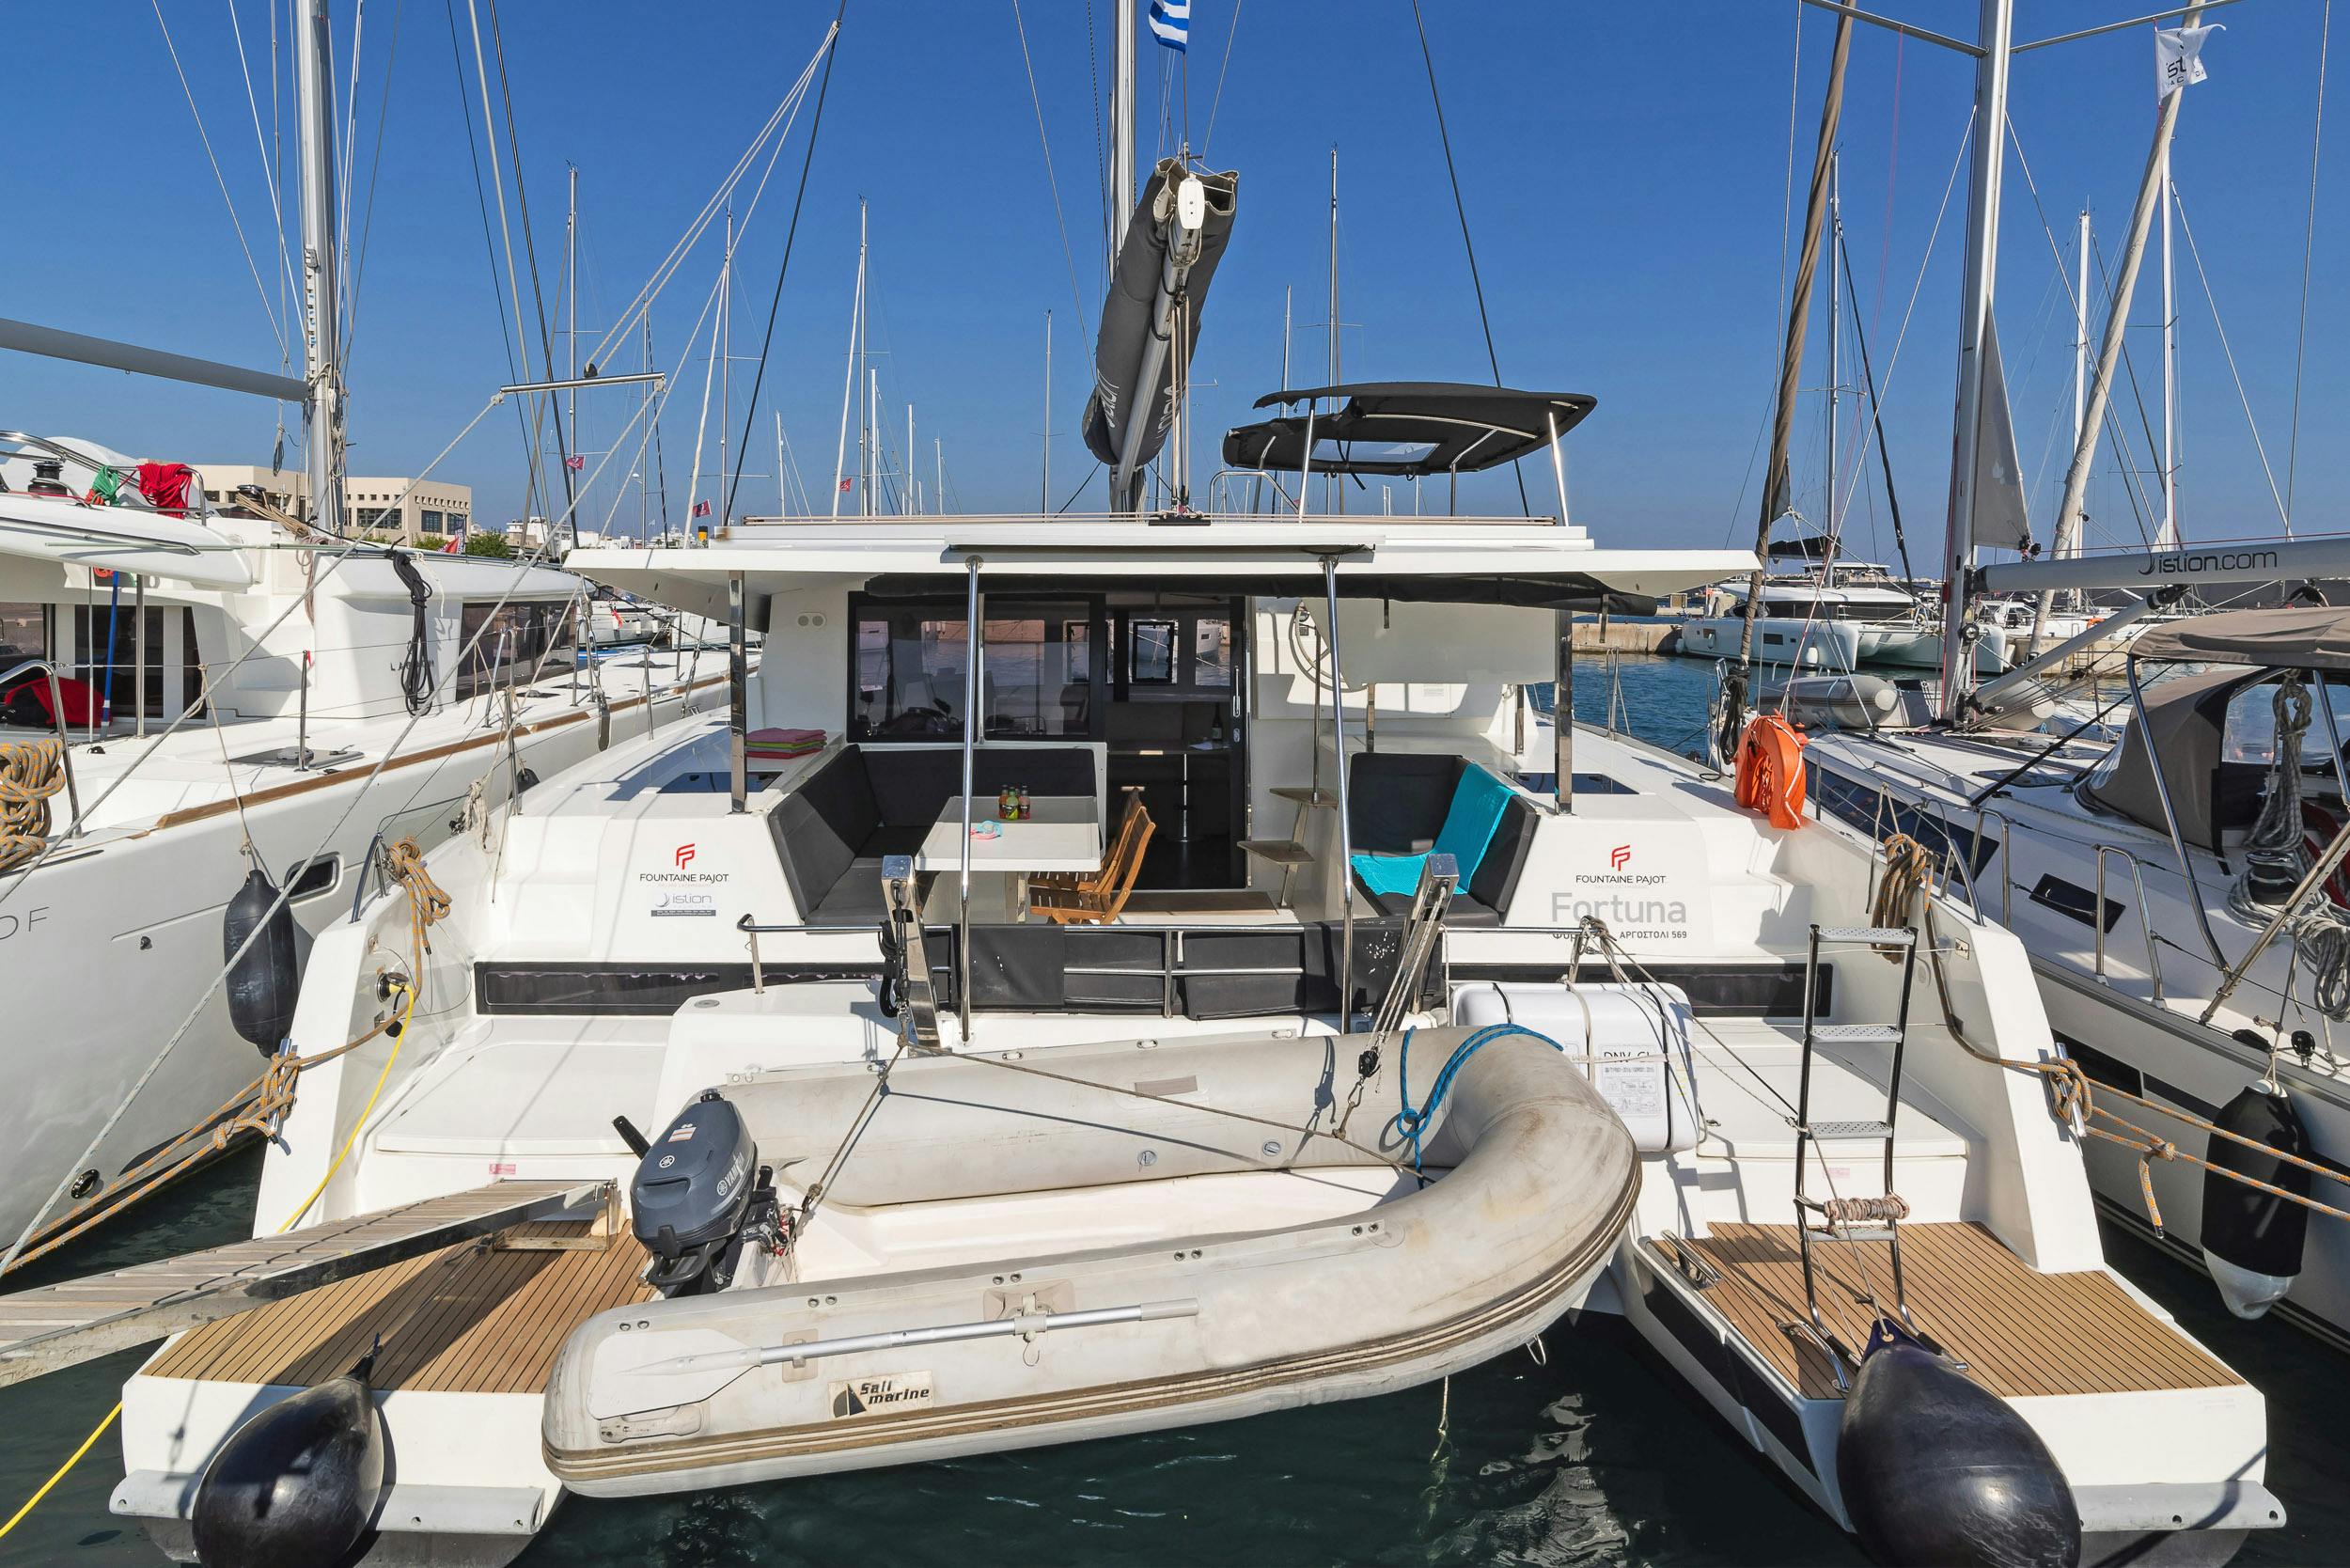 Book Fountaine Pajot Lucia 40 Catamaran for bareboat charter in Rhodes New Marina, Dodecanese, Greece with TripYacht!, picture 19